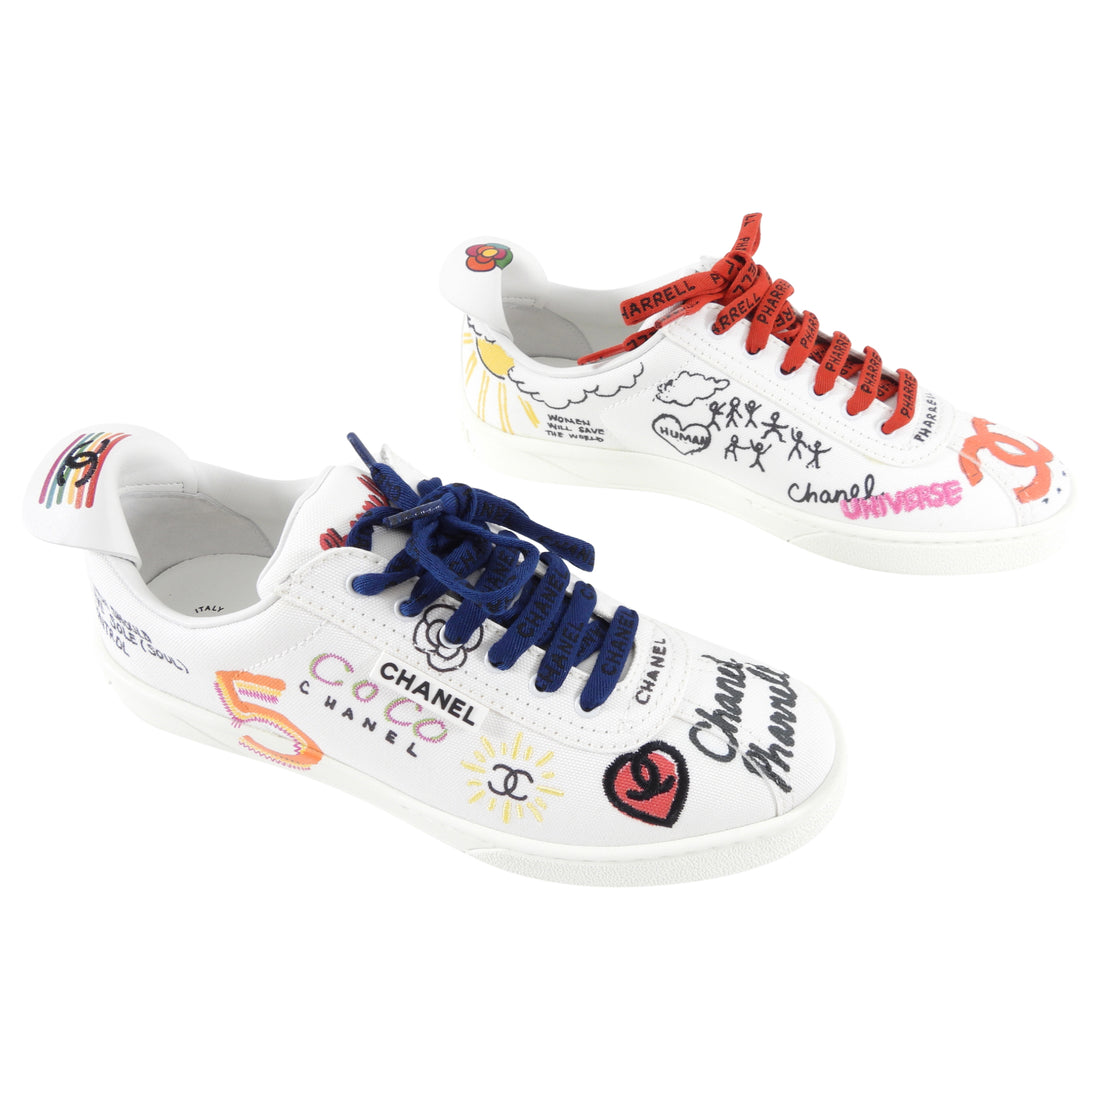 Chanel x Pharrell Limited Edition White Tennis Sneakers - 37.5